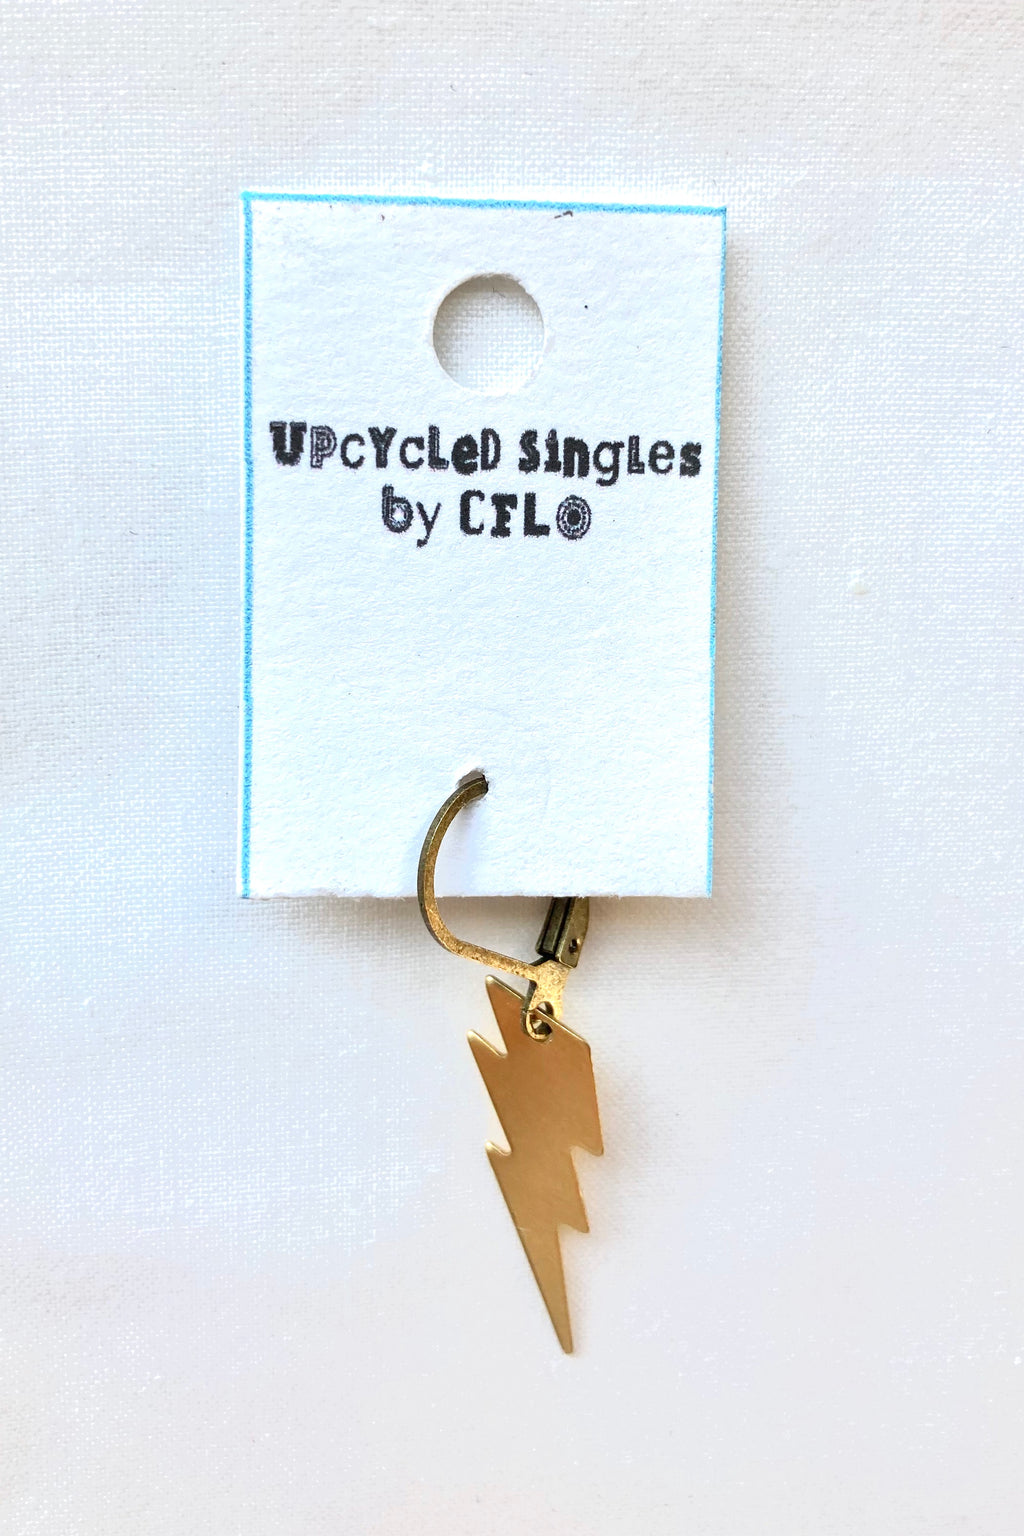 Upcycled Singles! Small Gold Lightning Bolt! Vintage Charms For Your Ears!